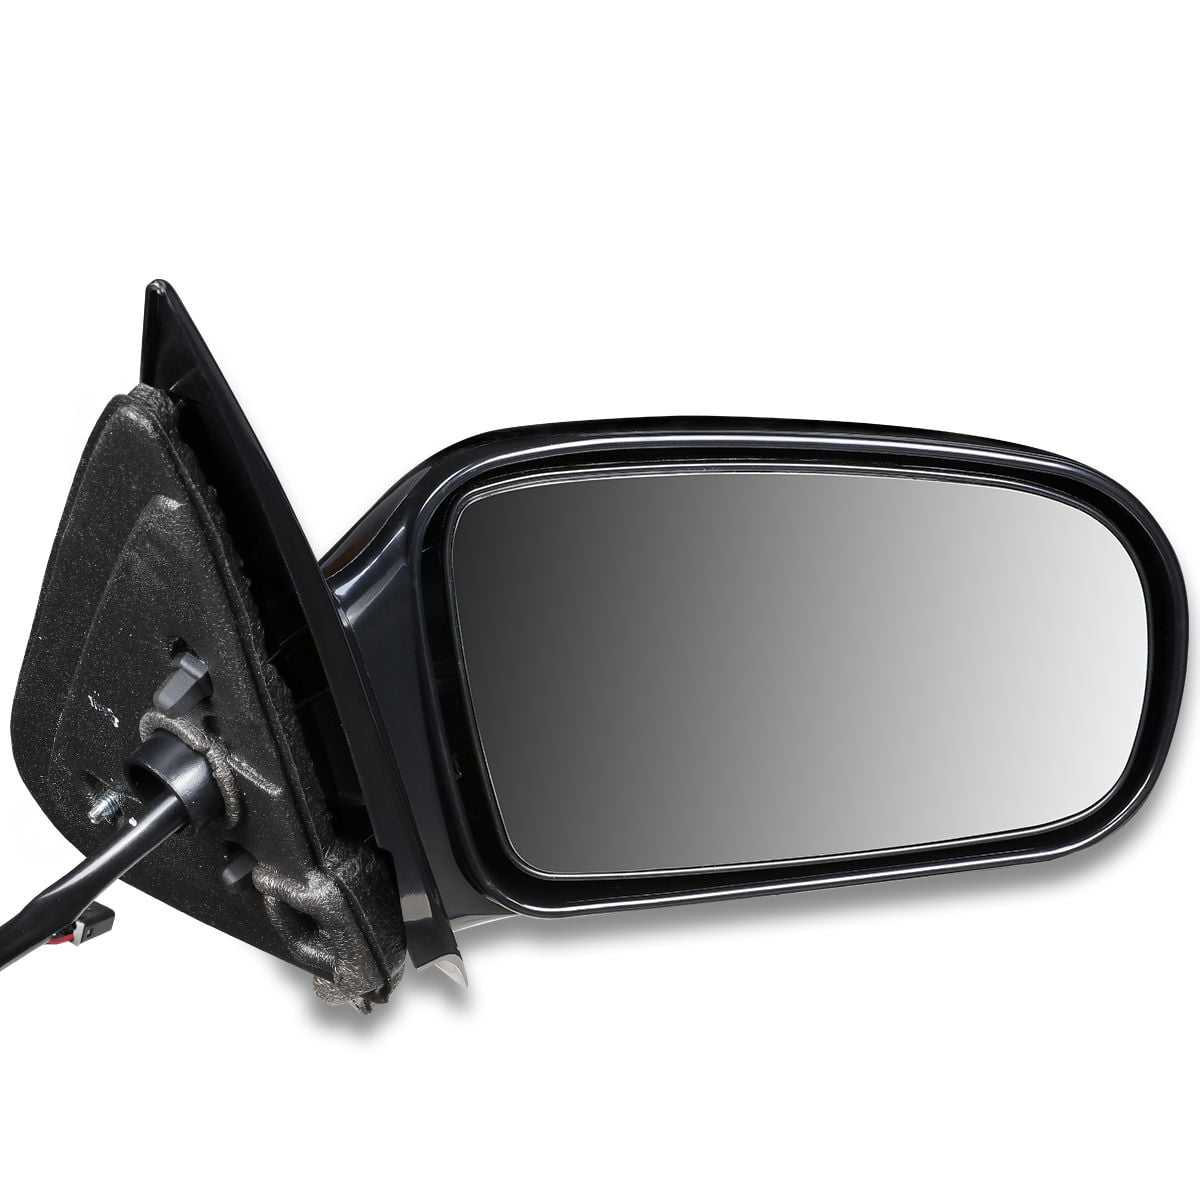 Mirror Right Hand Side for Chevy Passenger RH GM1321148 22728847 Coupe Cavalier